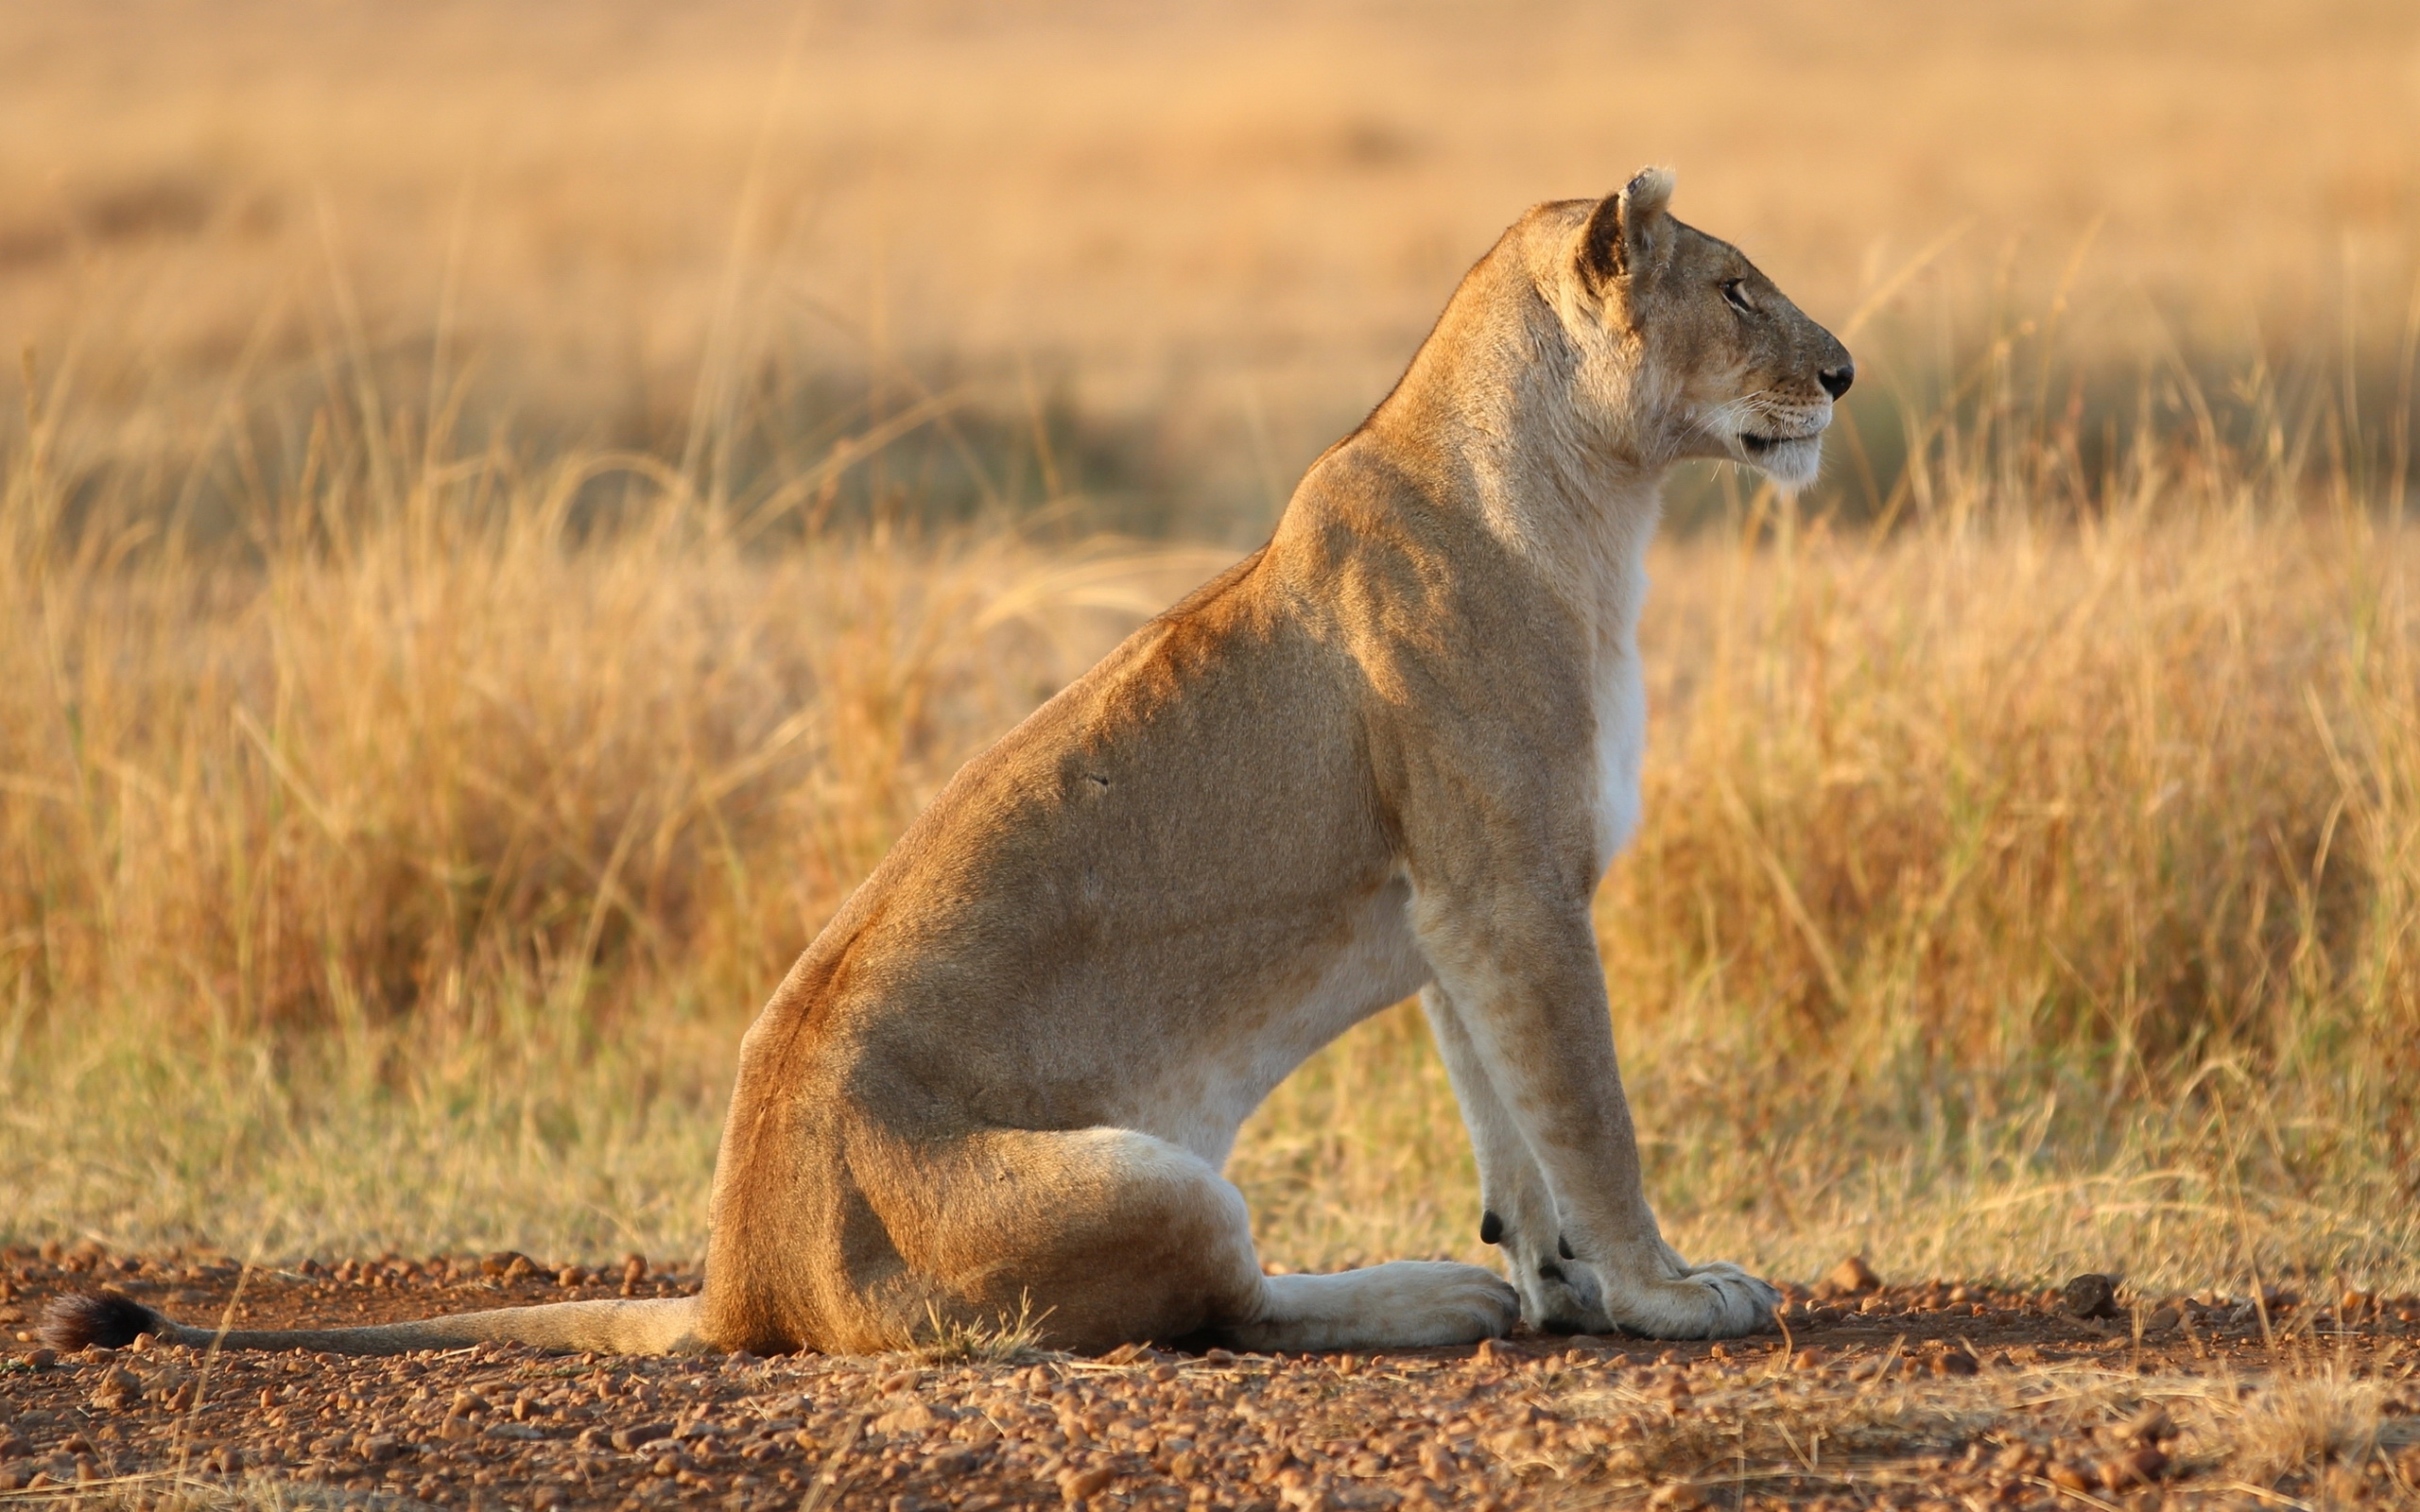 Image Wallpaper Of Lioness In HD Quality Bsnscb Gallery